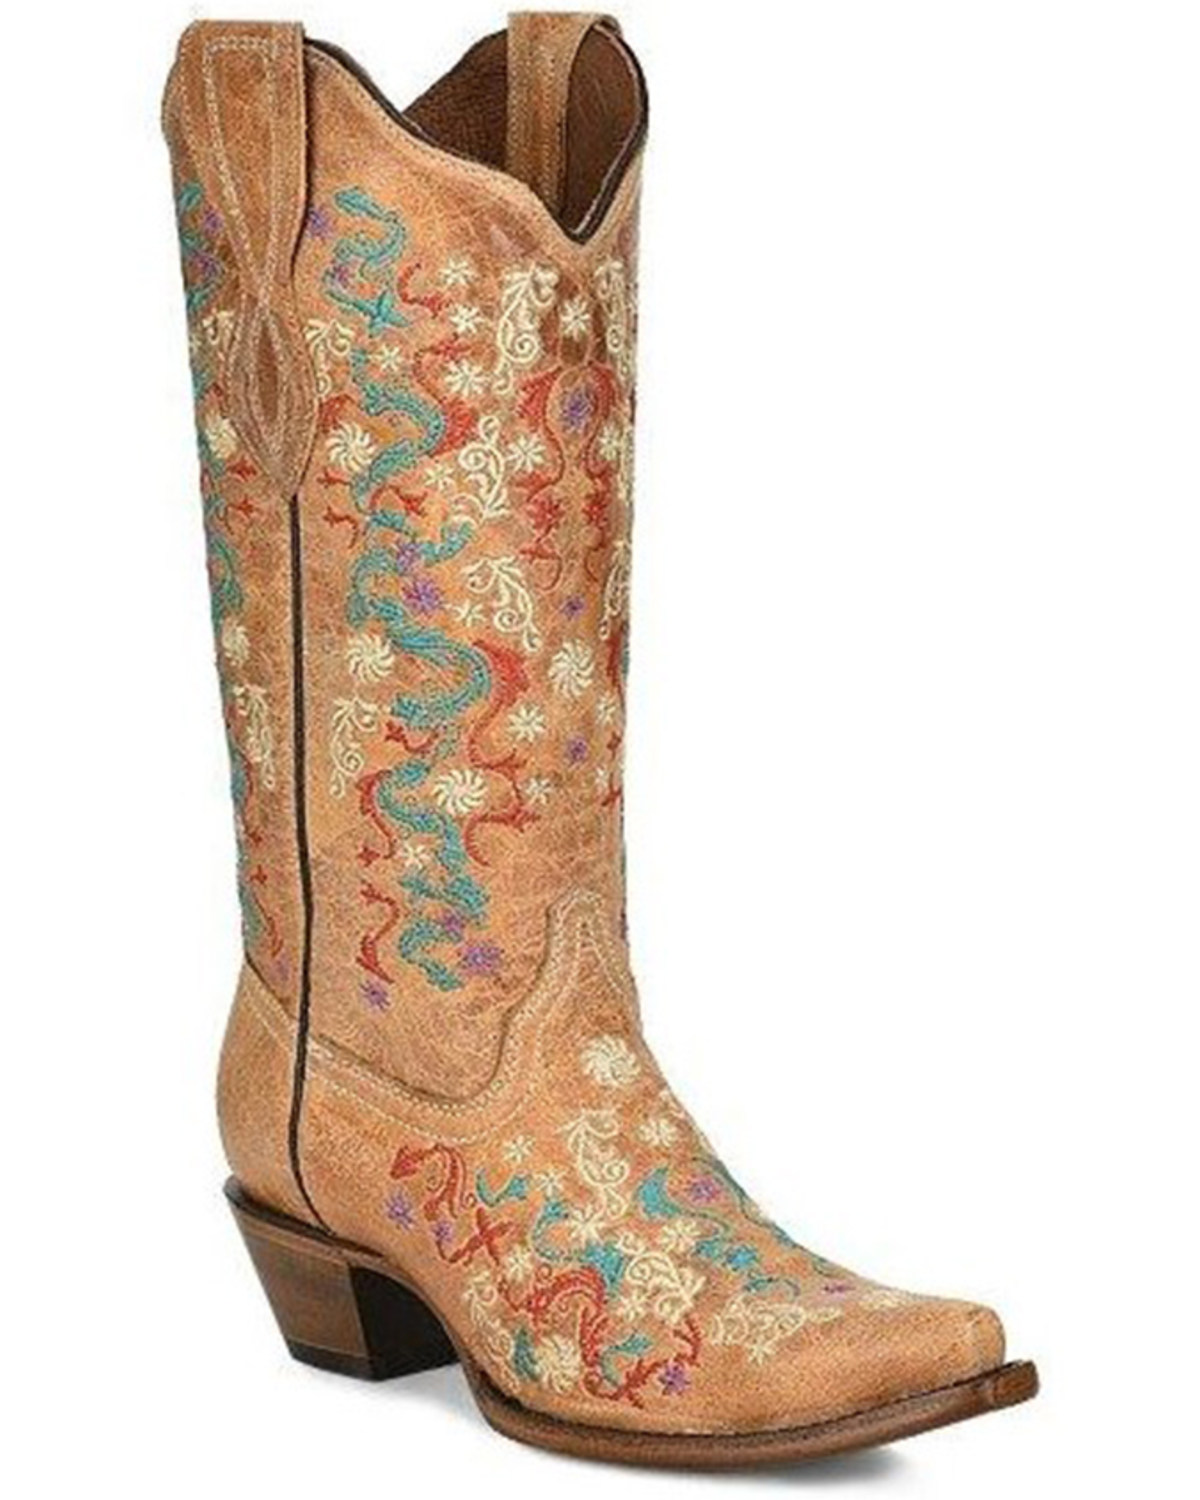 Circle G Women's Floral Embroidery Western Boots - Snip Toe